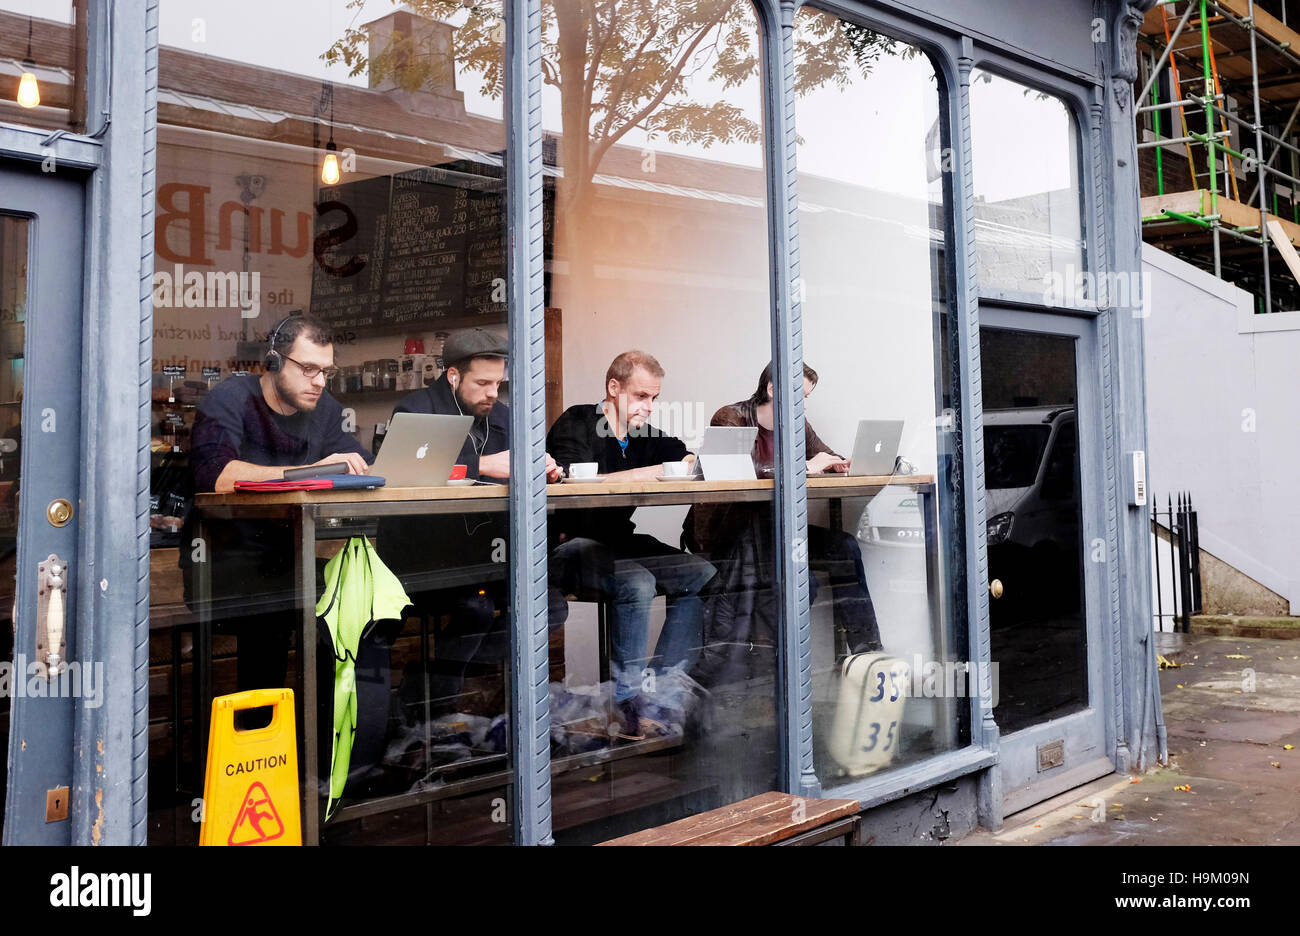 Islington London UK - Men at their computers in window of a coffee shop in Islington High Street Stock Photo